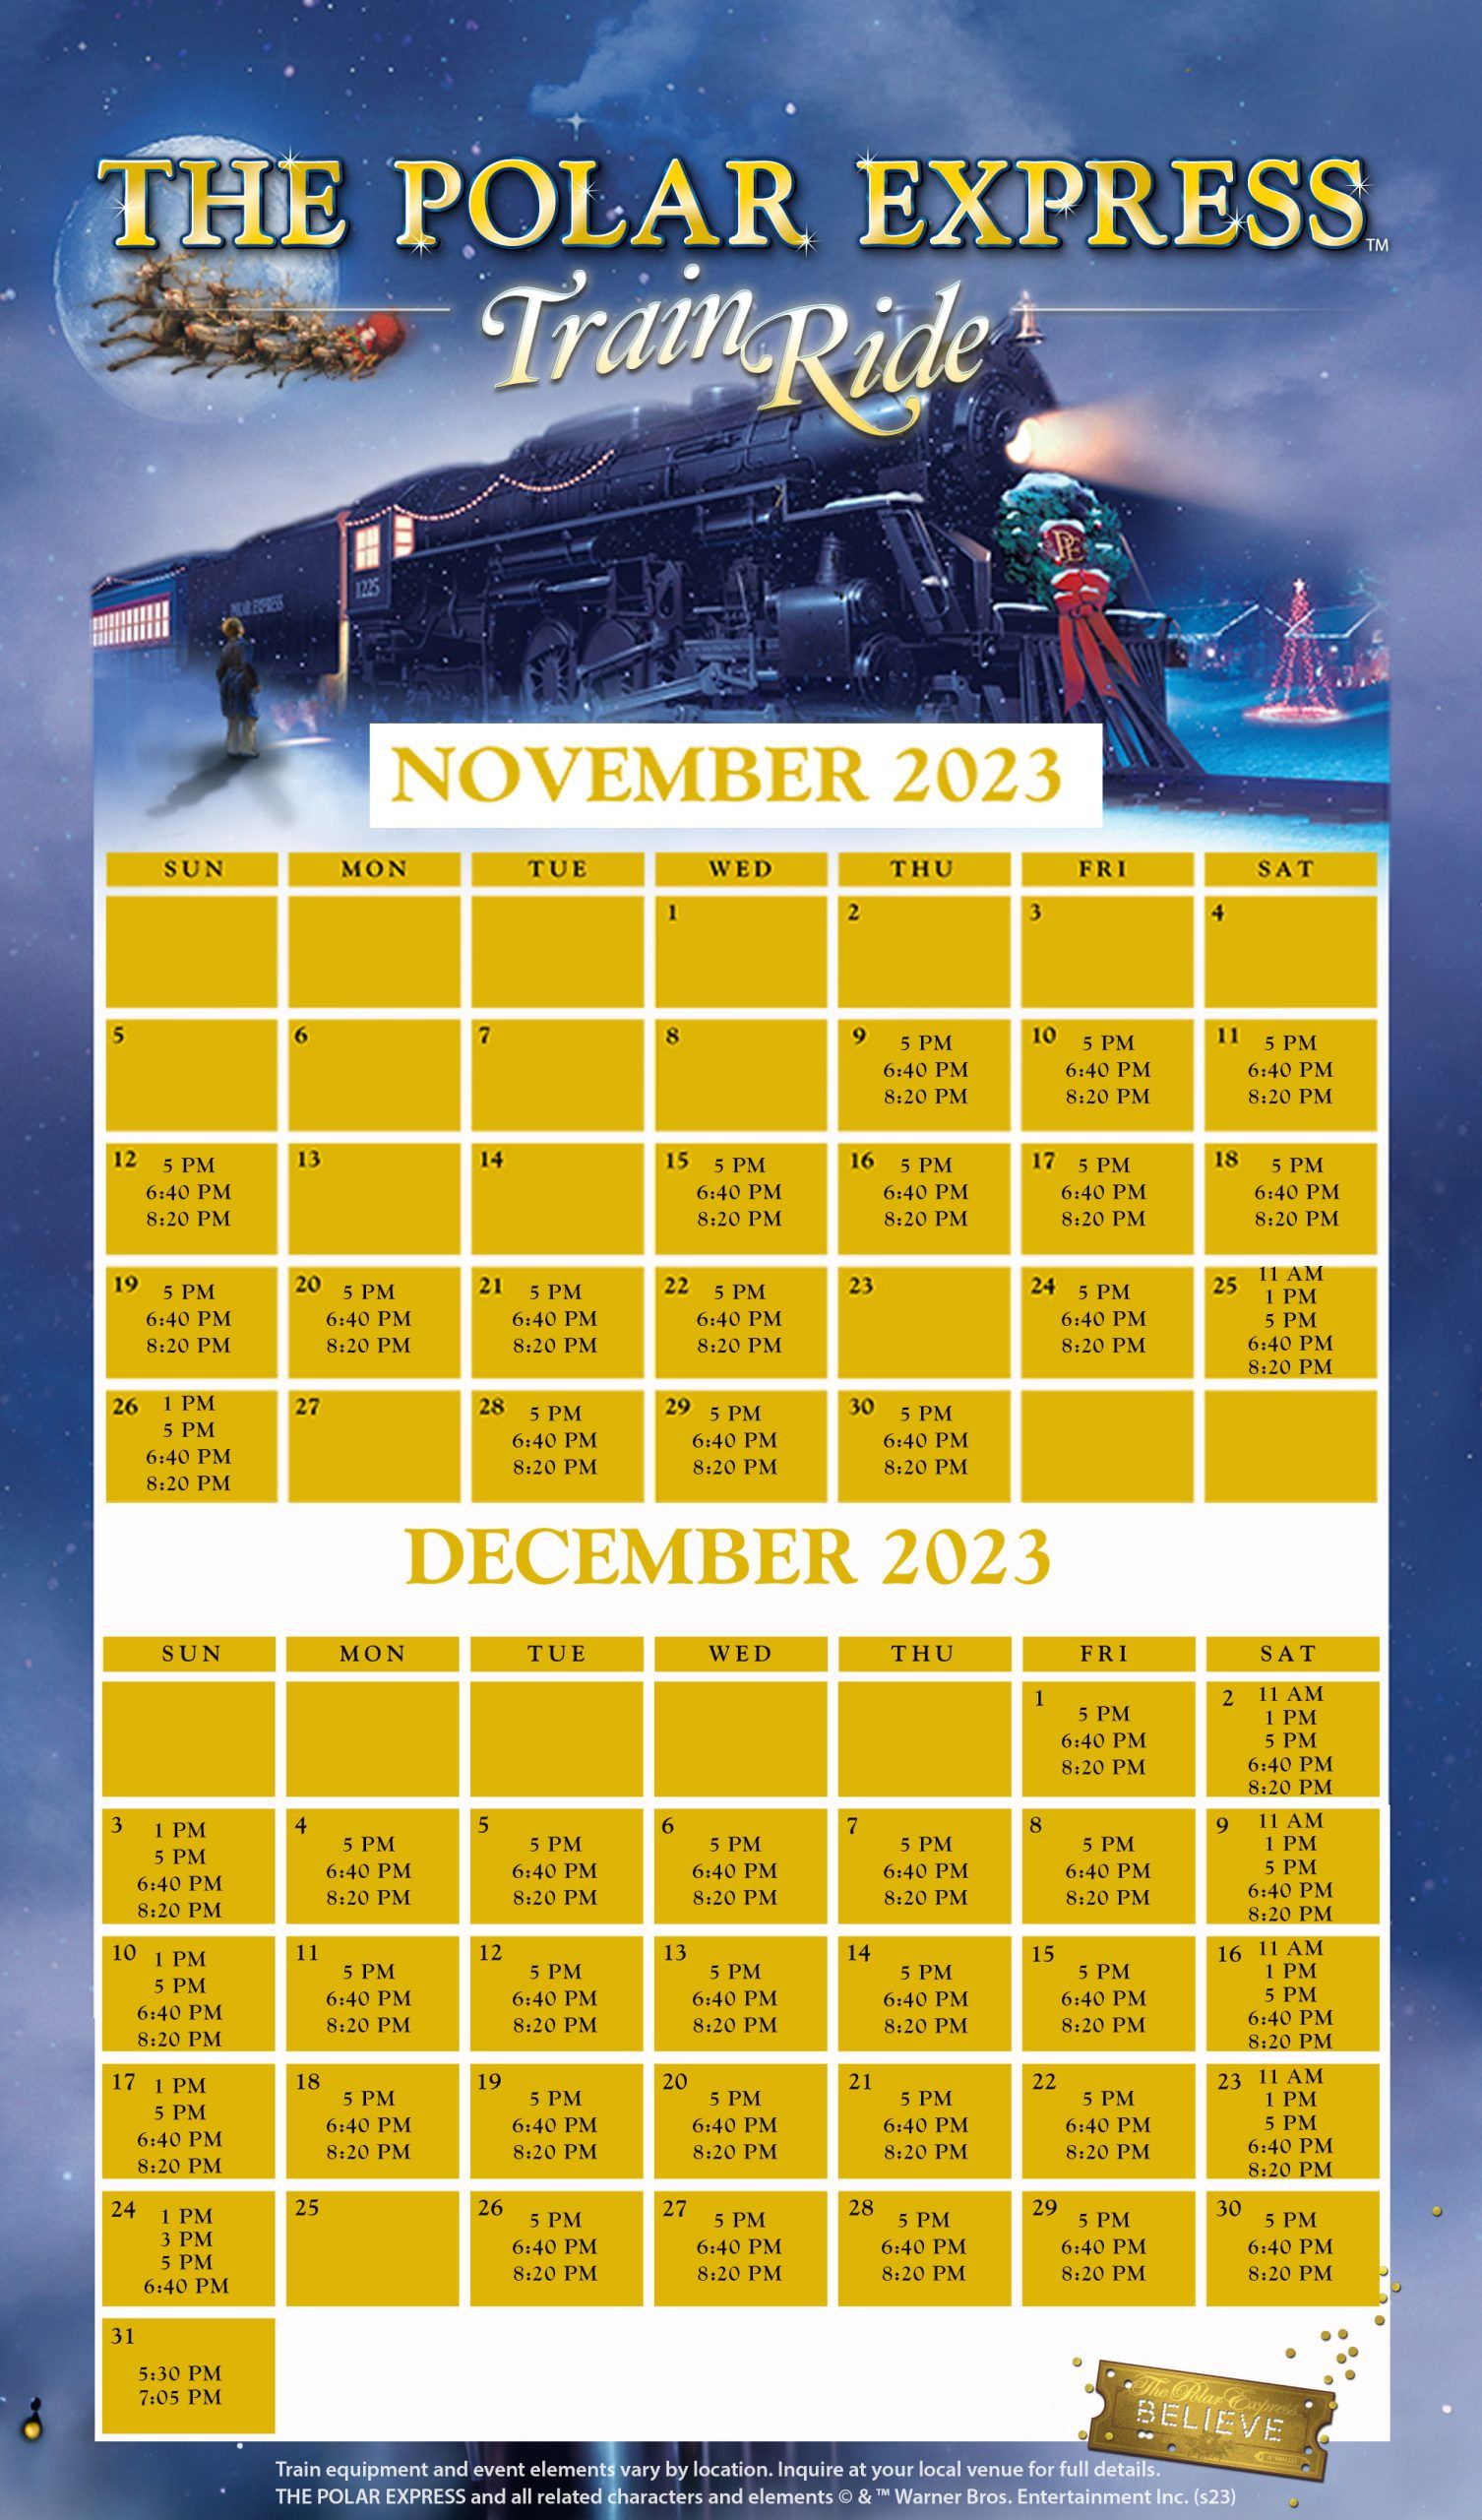 The Polar Express Train Ride 2023 available dates Calendar. On sale now in Bryson City, North Carolina. Santa is waiting.